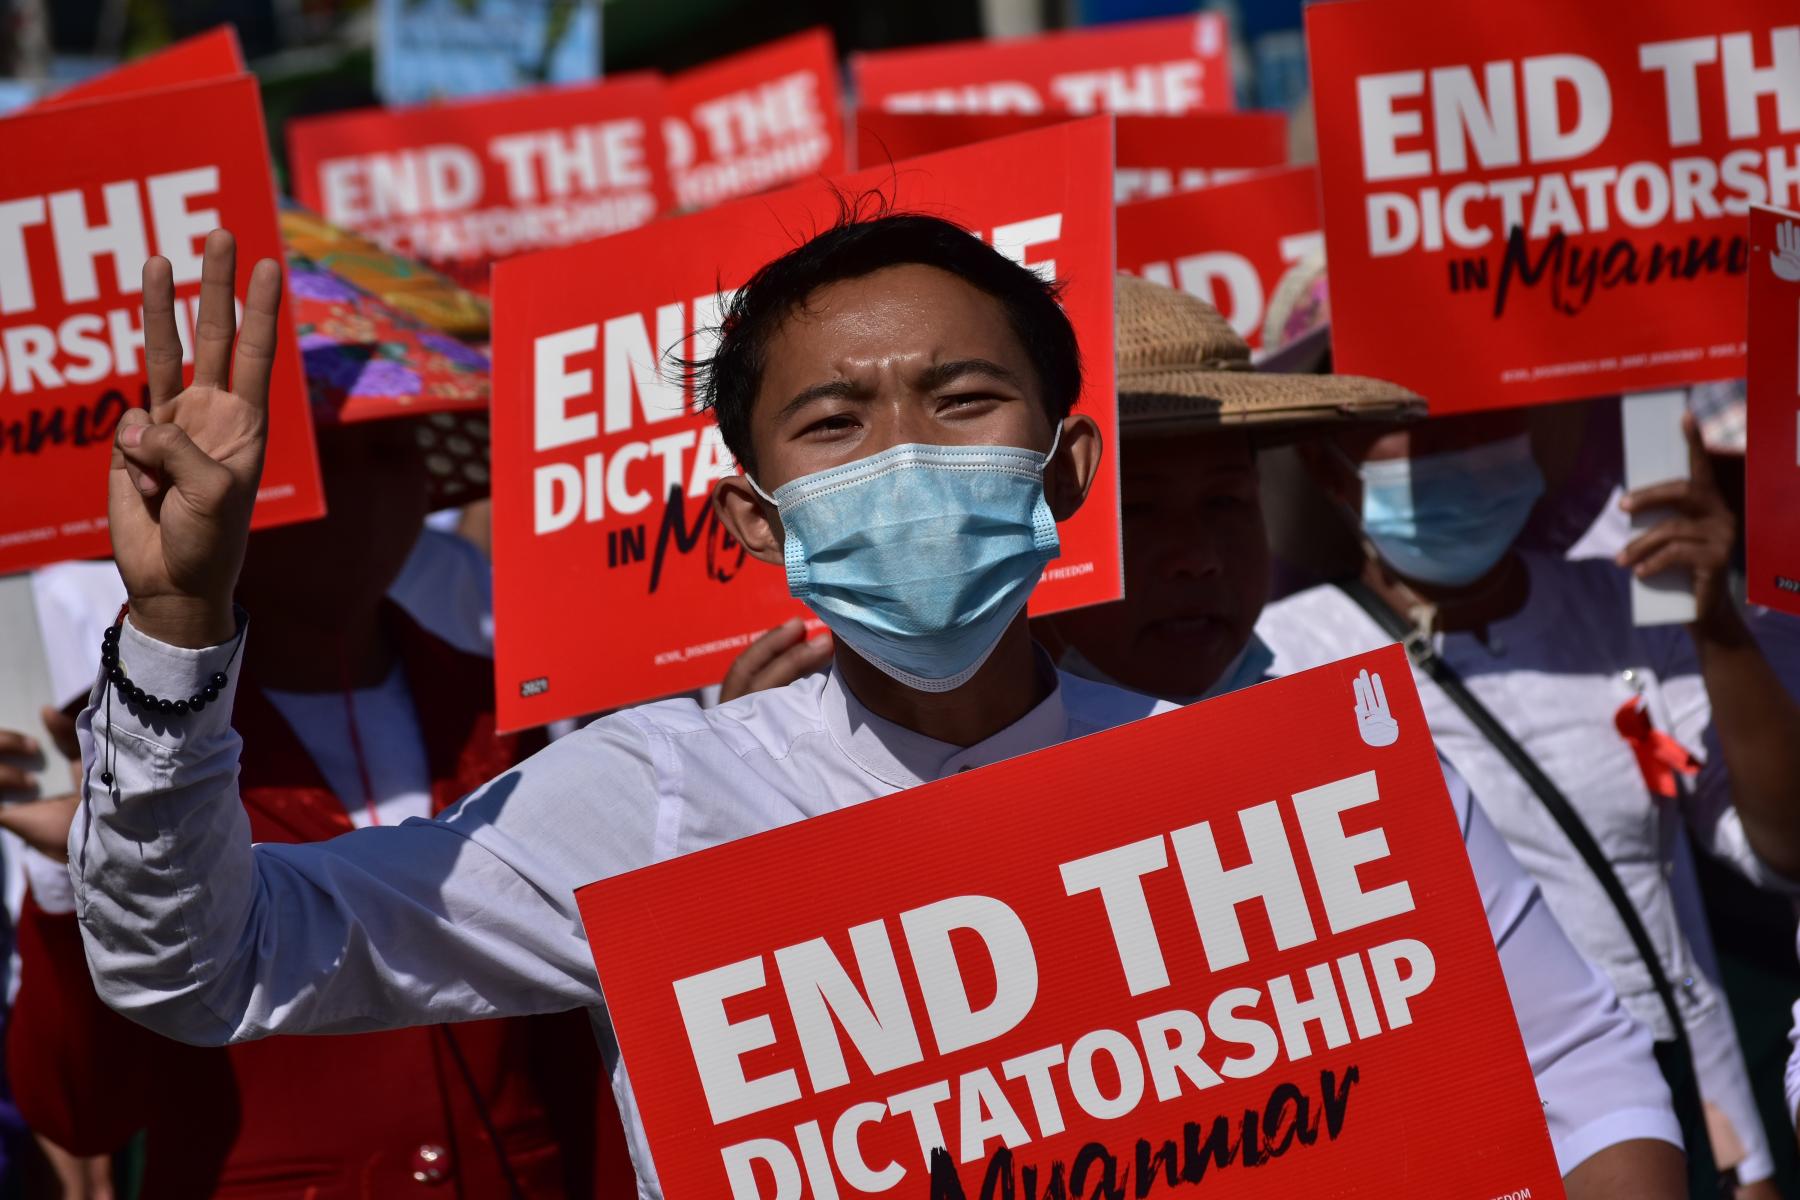 Myanmar people took to the streets to protest against the military coup